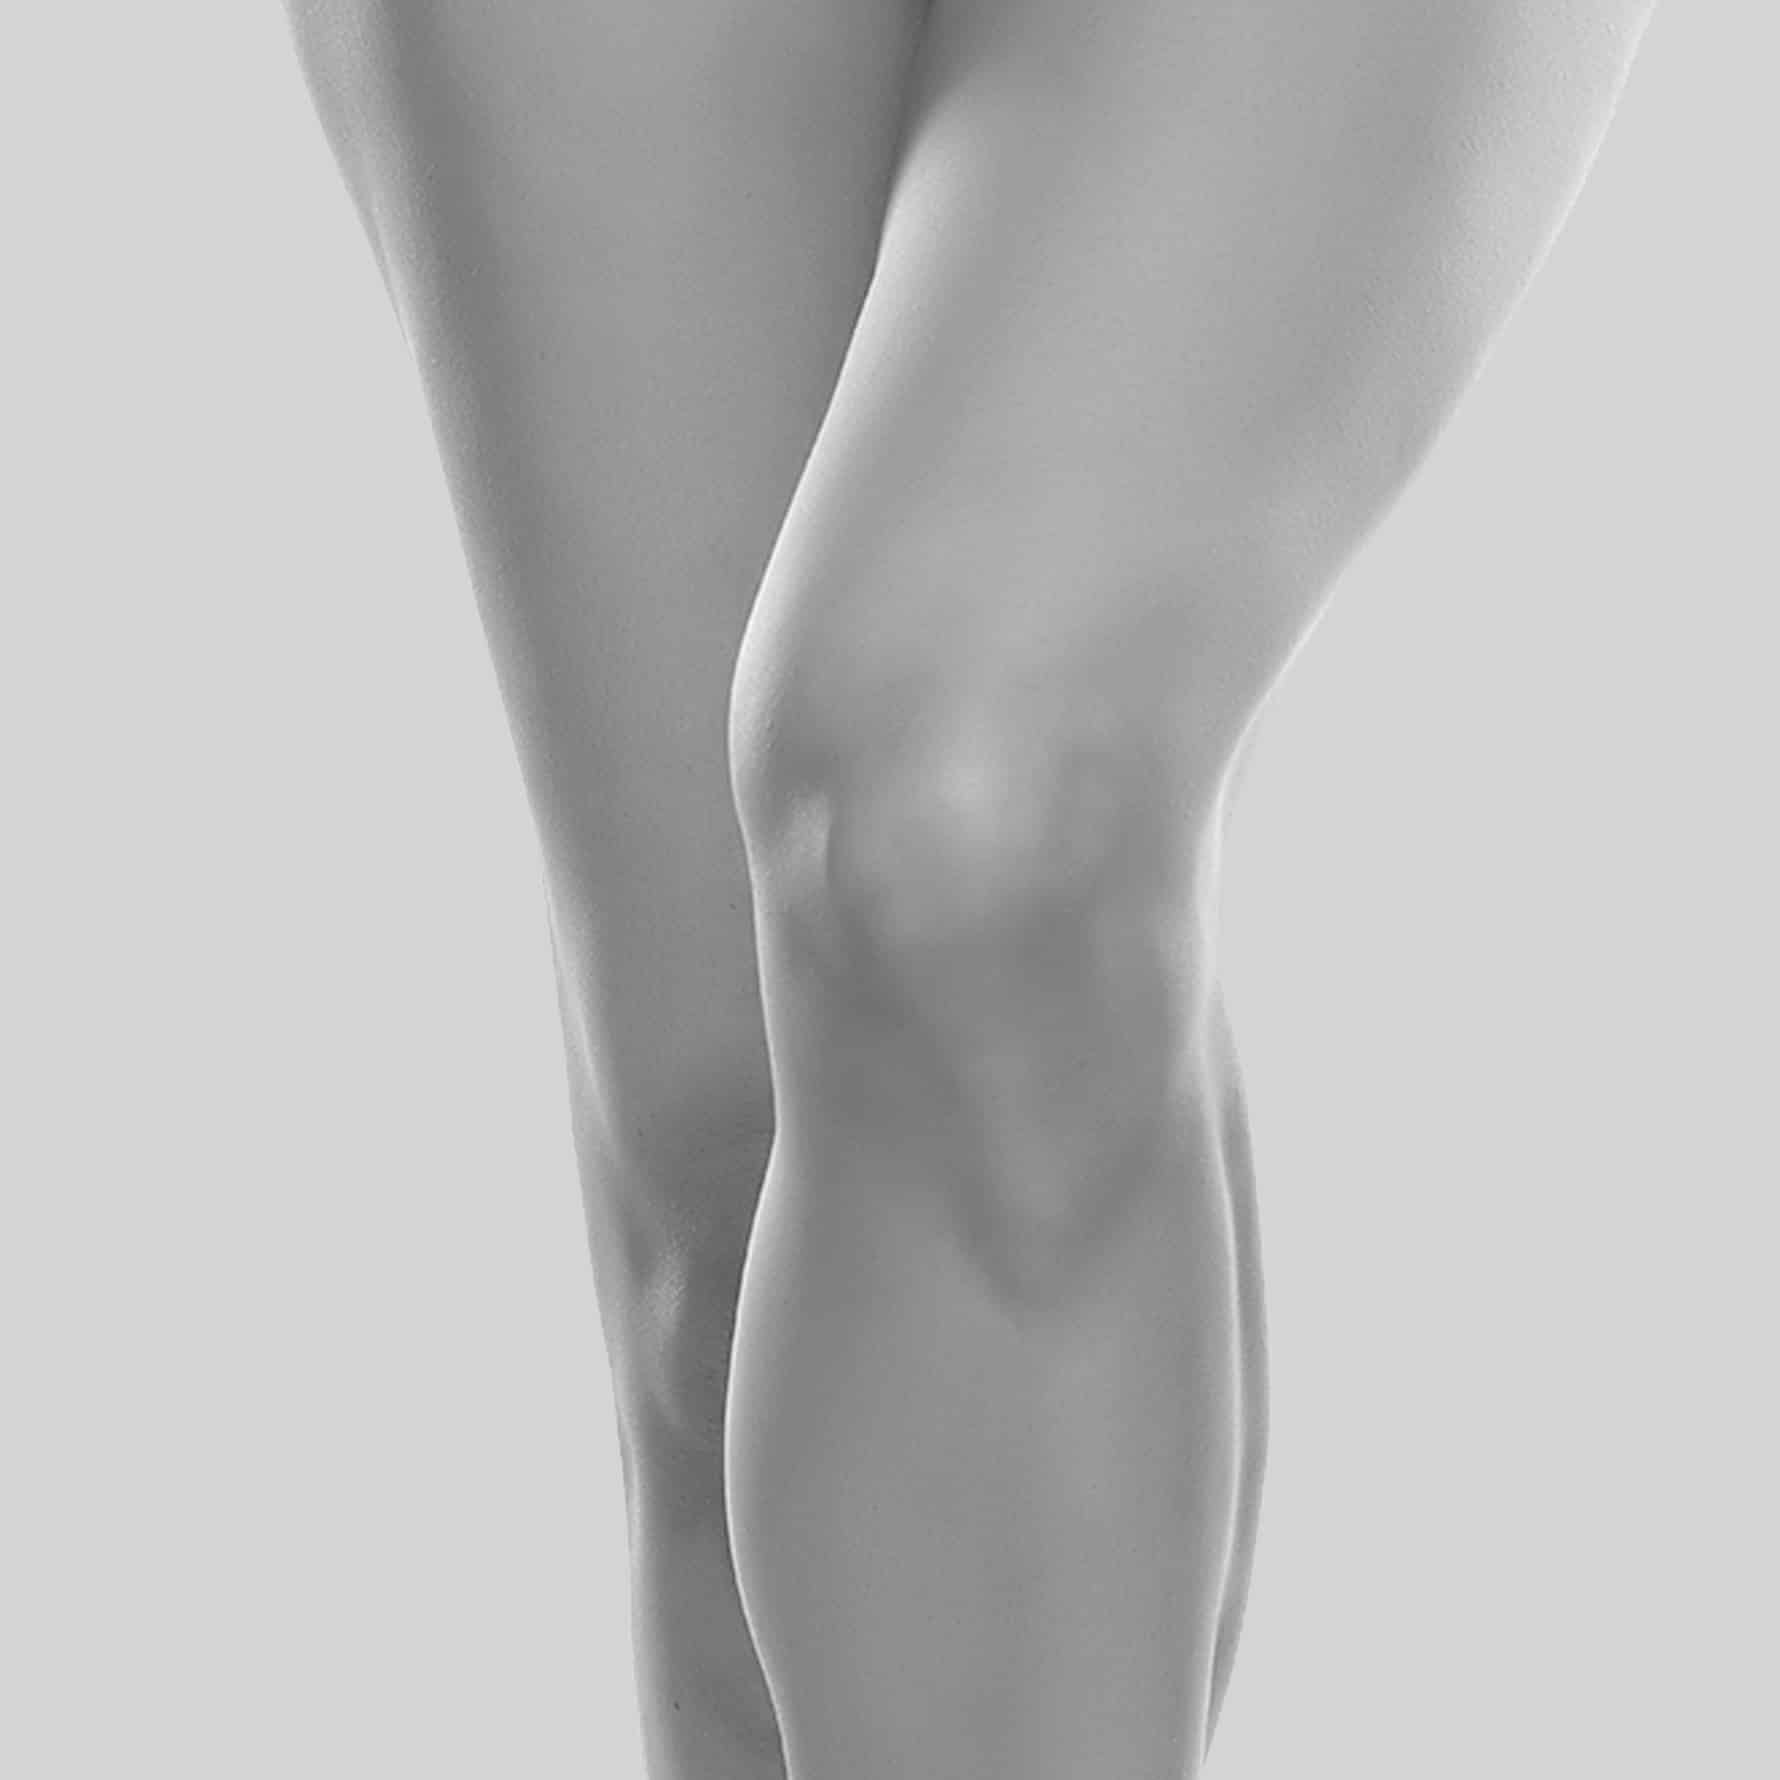 Liposuction treatments such as CoolSculpting, Emsculpt and Exilis are used to reduce the fat above the knee